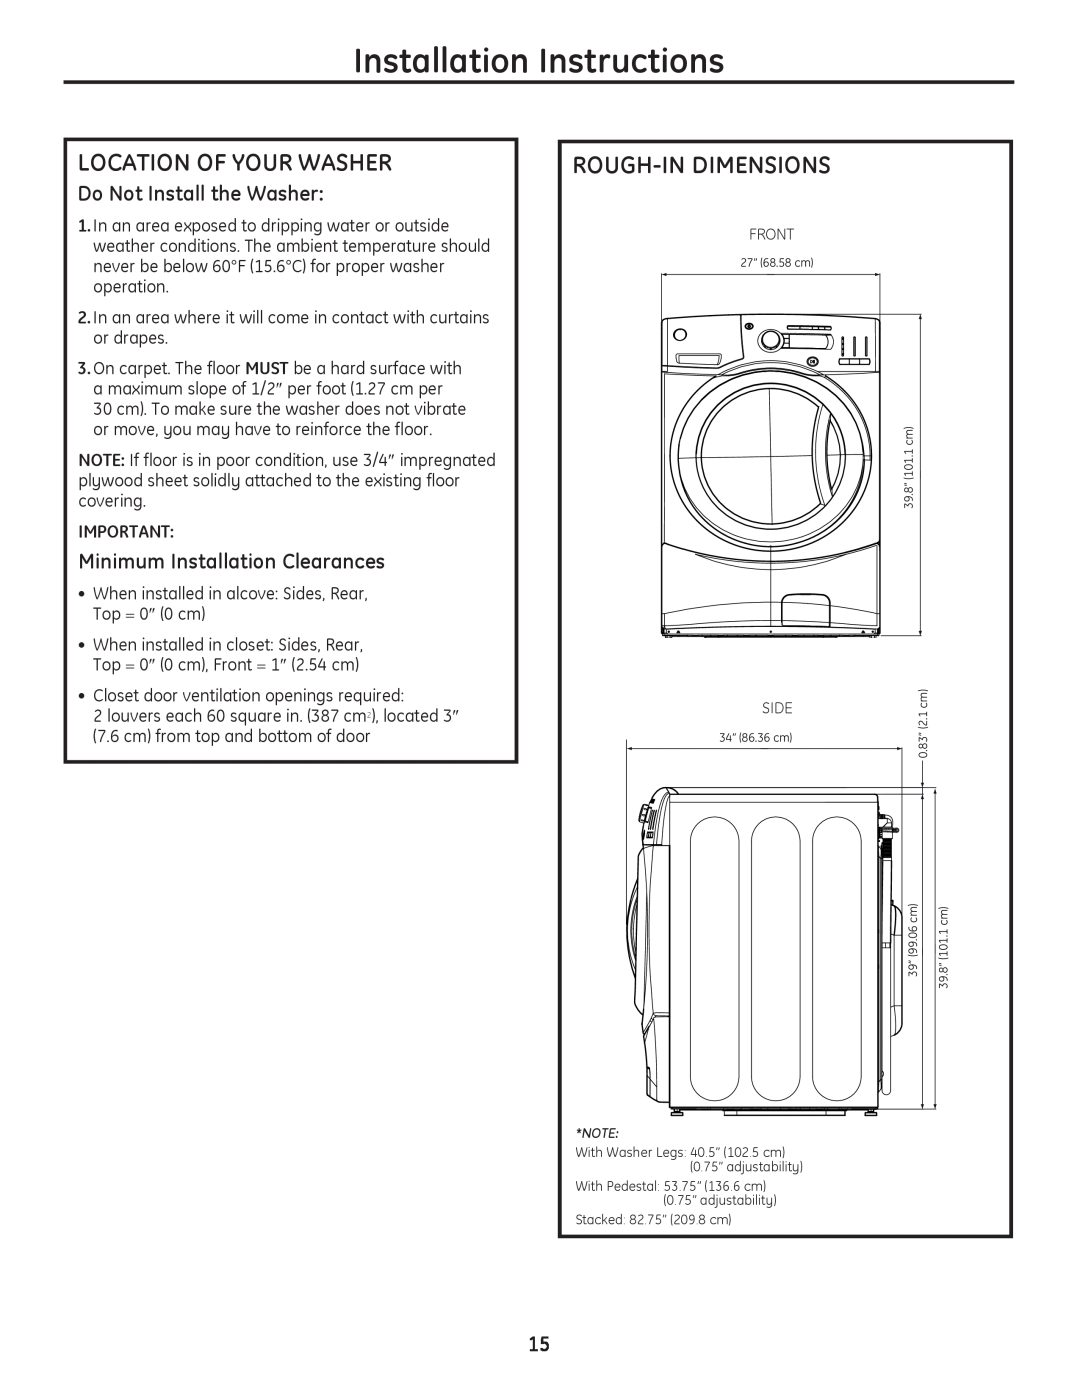 GE GFWS3600, GFWS3605 Installation Instructions, Location Of Your Washer, Rough-In Dimensions, Do Not Install the Washer 